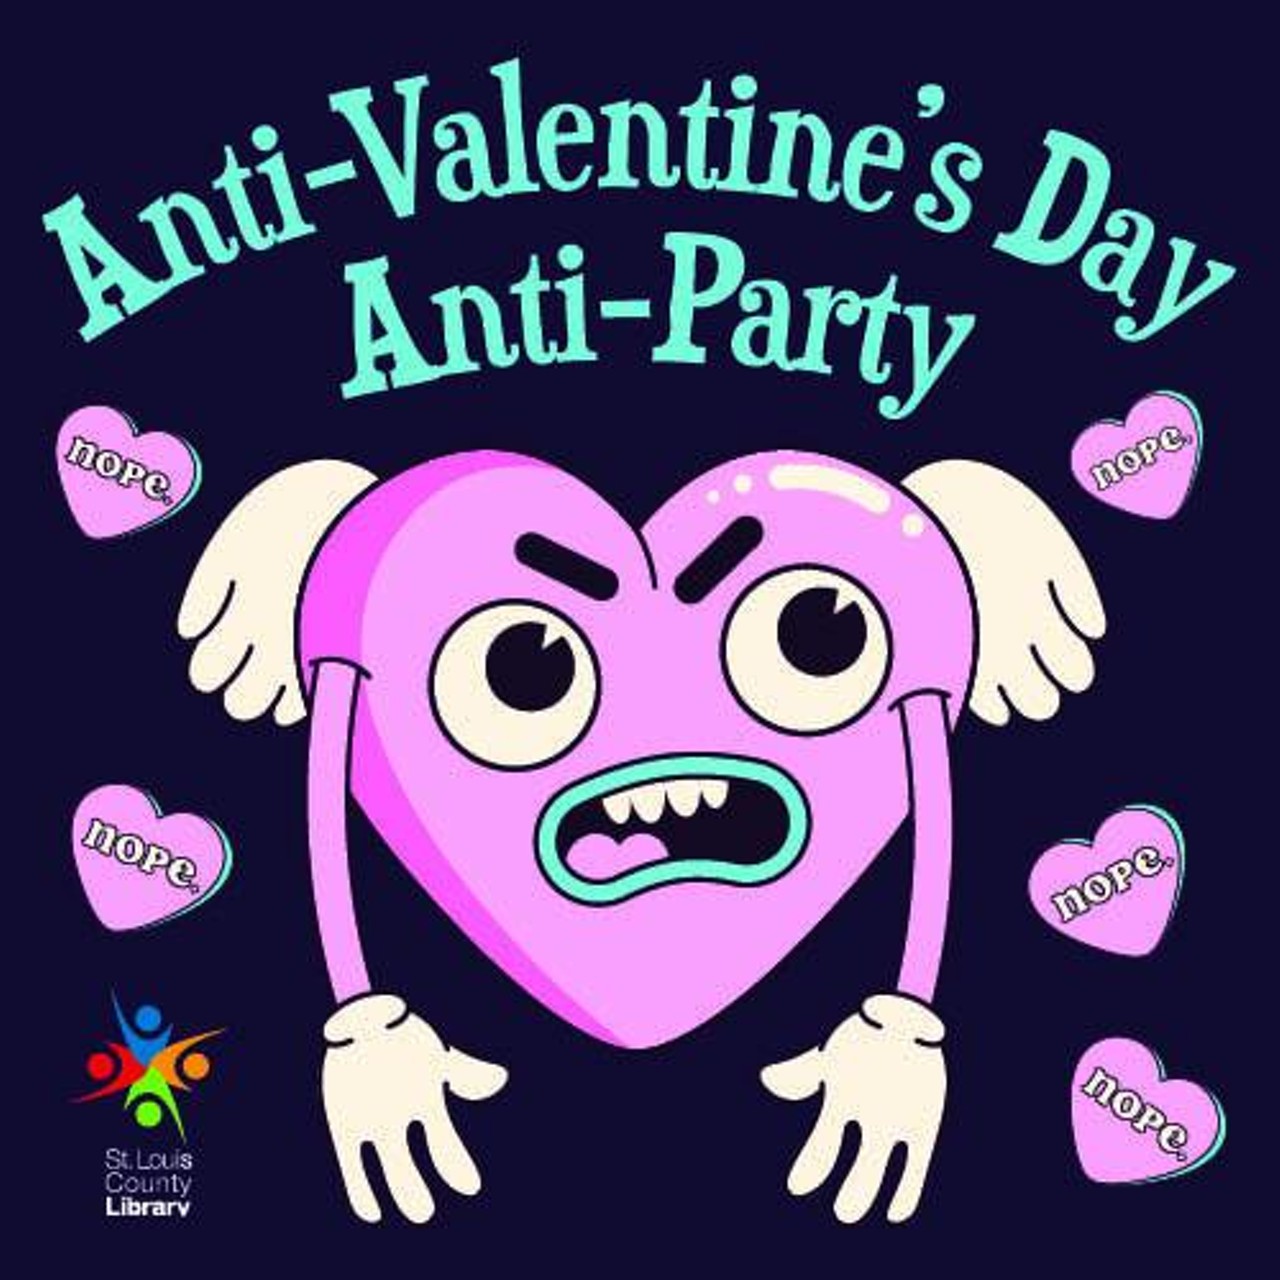 Anti-Valentine's Day Anti-Party with St. Louis County Library
Haters to the front! Sick of love, romance and all things pink and mushy? Join the St. Louis County Library, Mid-County Branch for some fictional character breakup trivia, a DIY anti-romance novel cover magnet and Mad Libs breakup letters. Snacks and drinks will be provided. Register on the library&rsquo;s website.